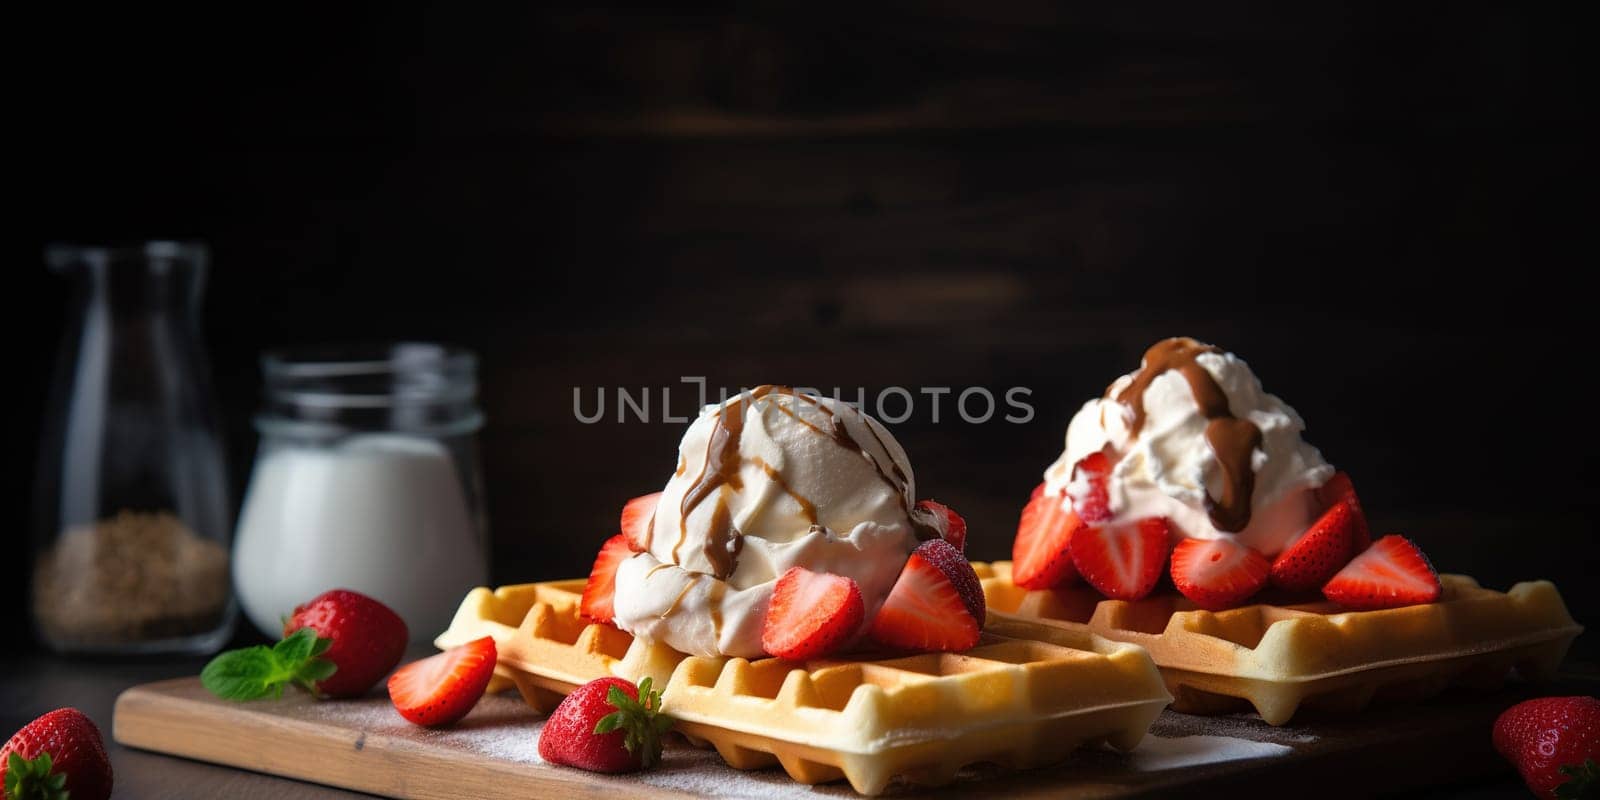 Delicious Waffle Dessert With Strawberries And Cream On A Plate, Dessert In Cafe